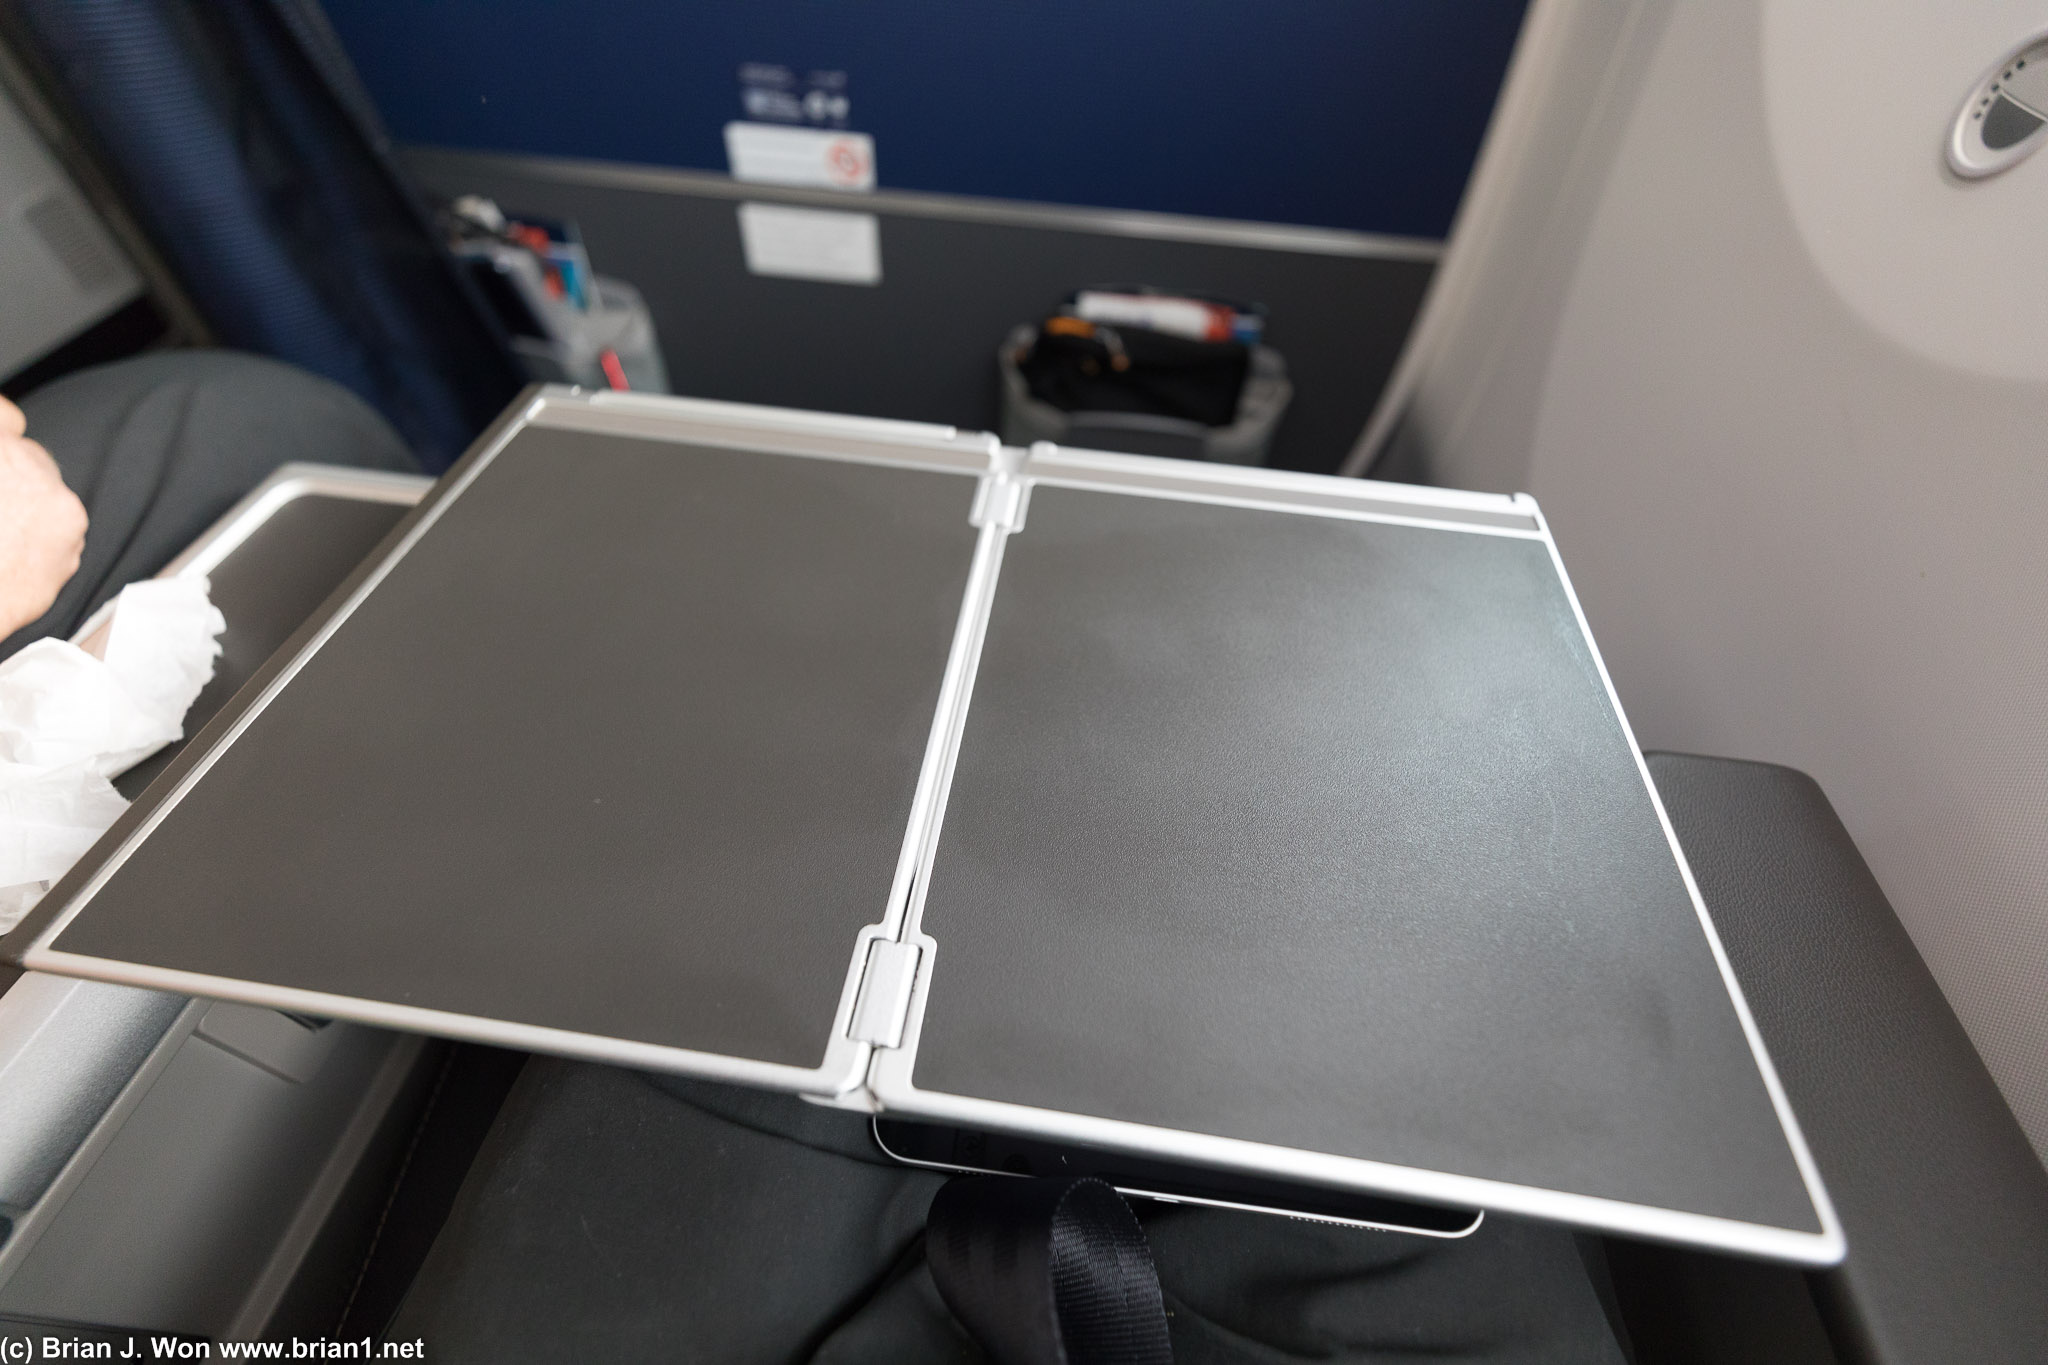 Tray table fully extended.